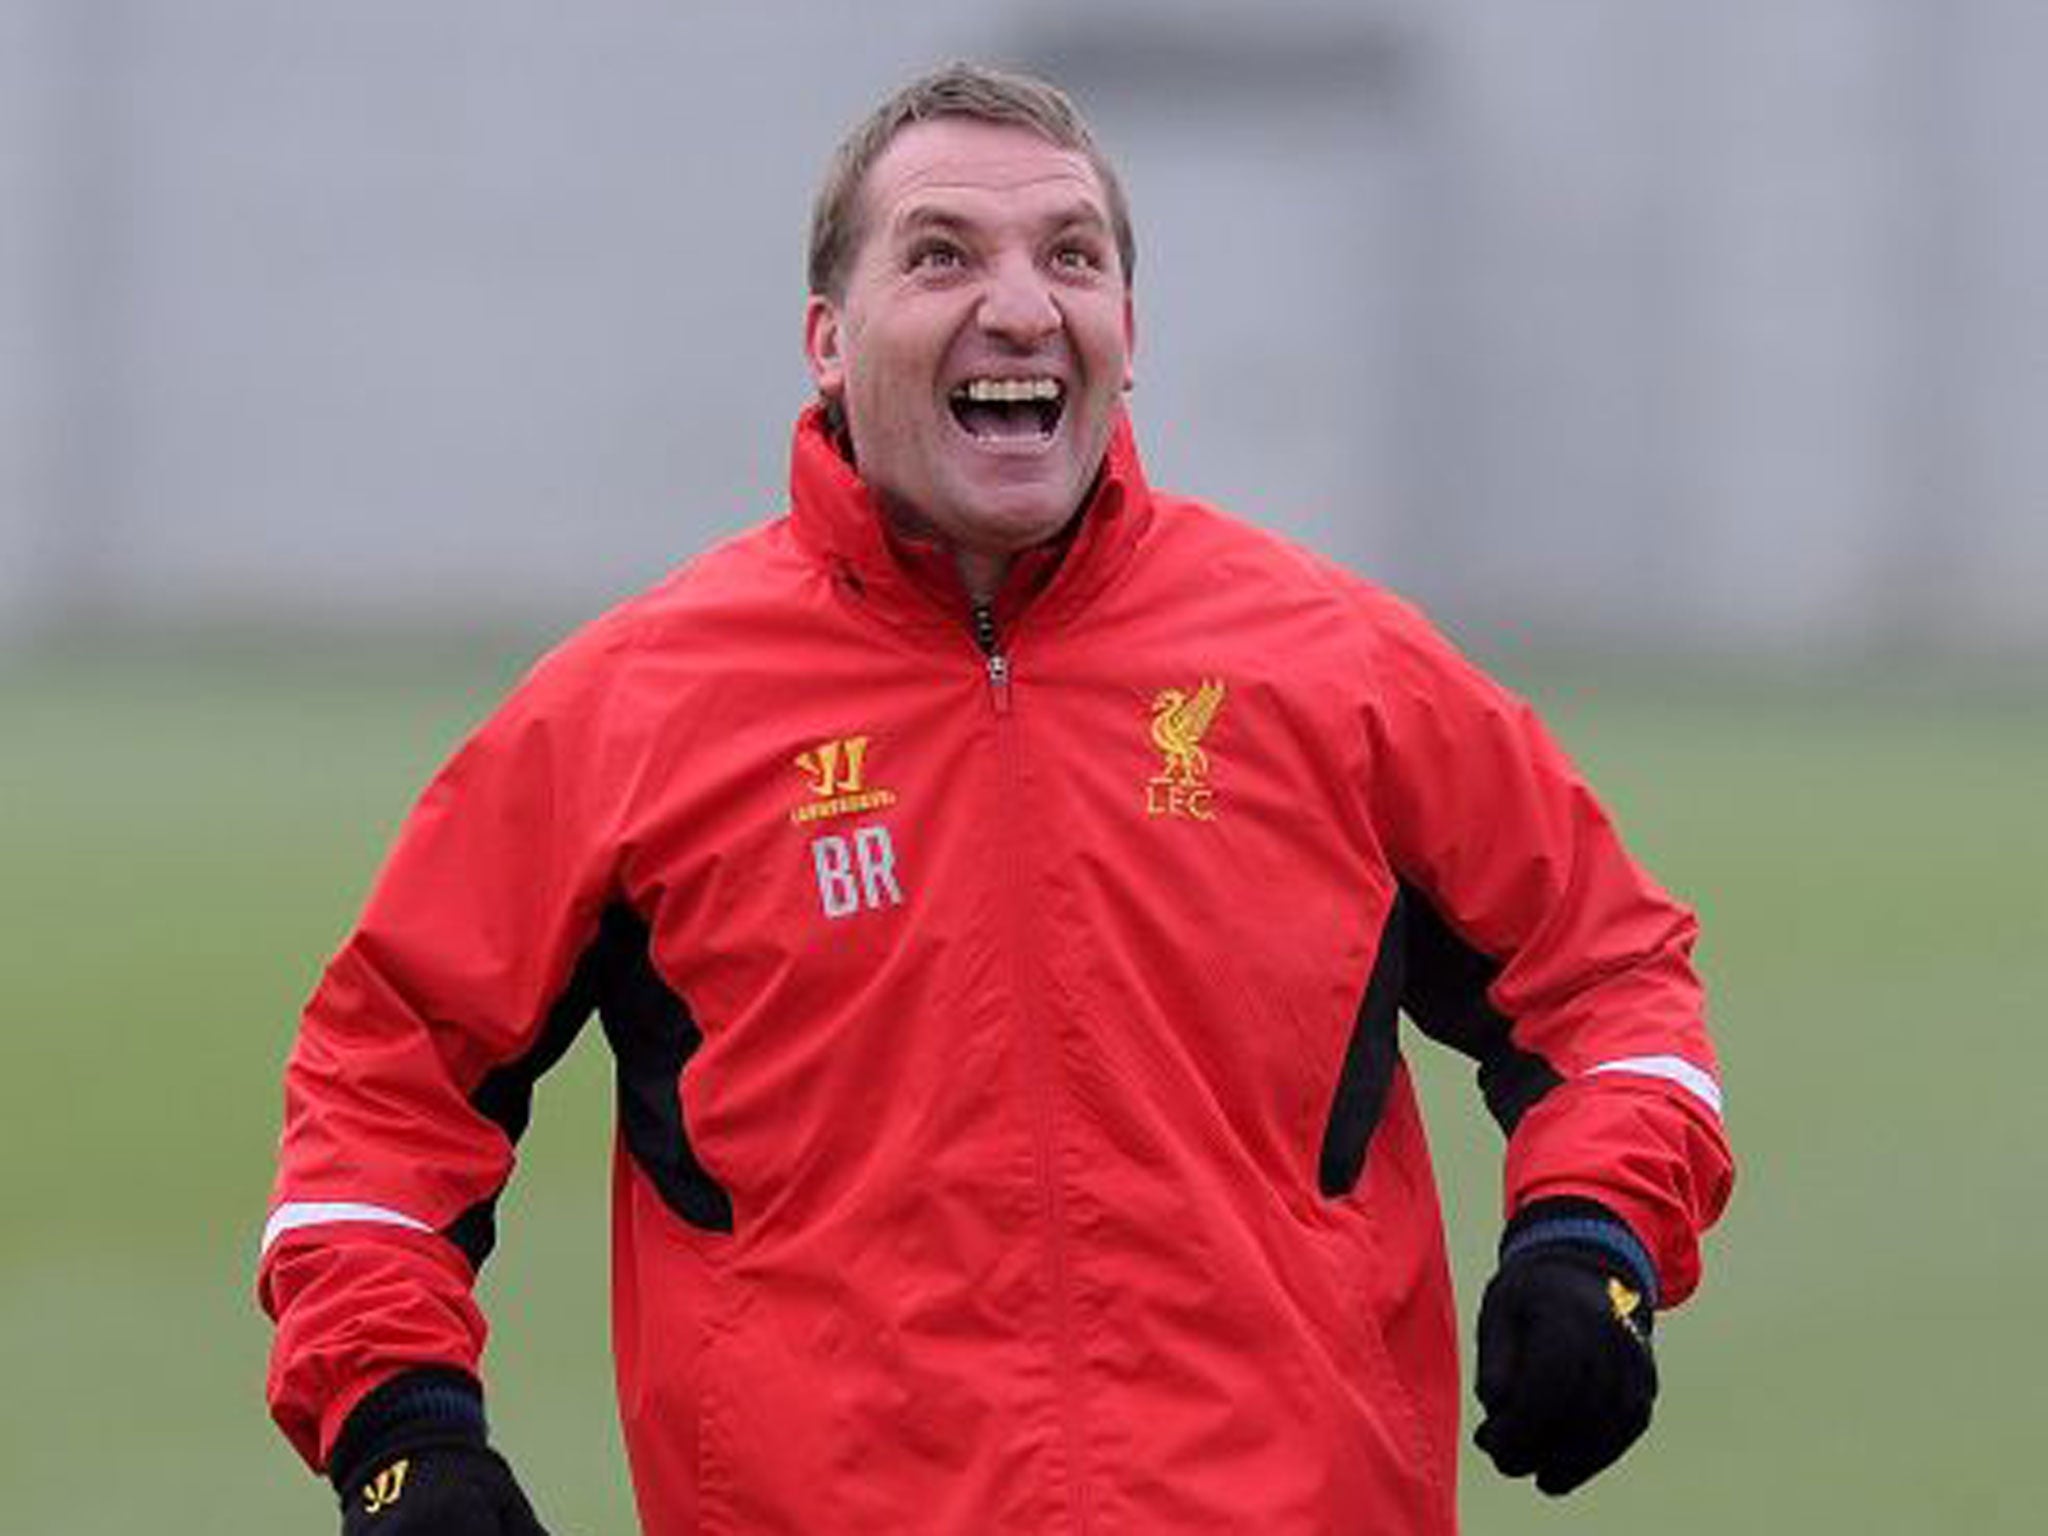 Brendan Rodgers: The Liverpool manager said he would not swap Suarez for Van Persie